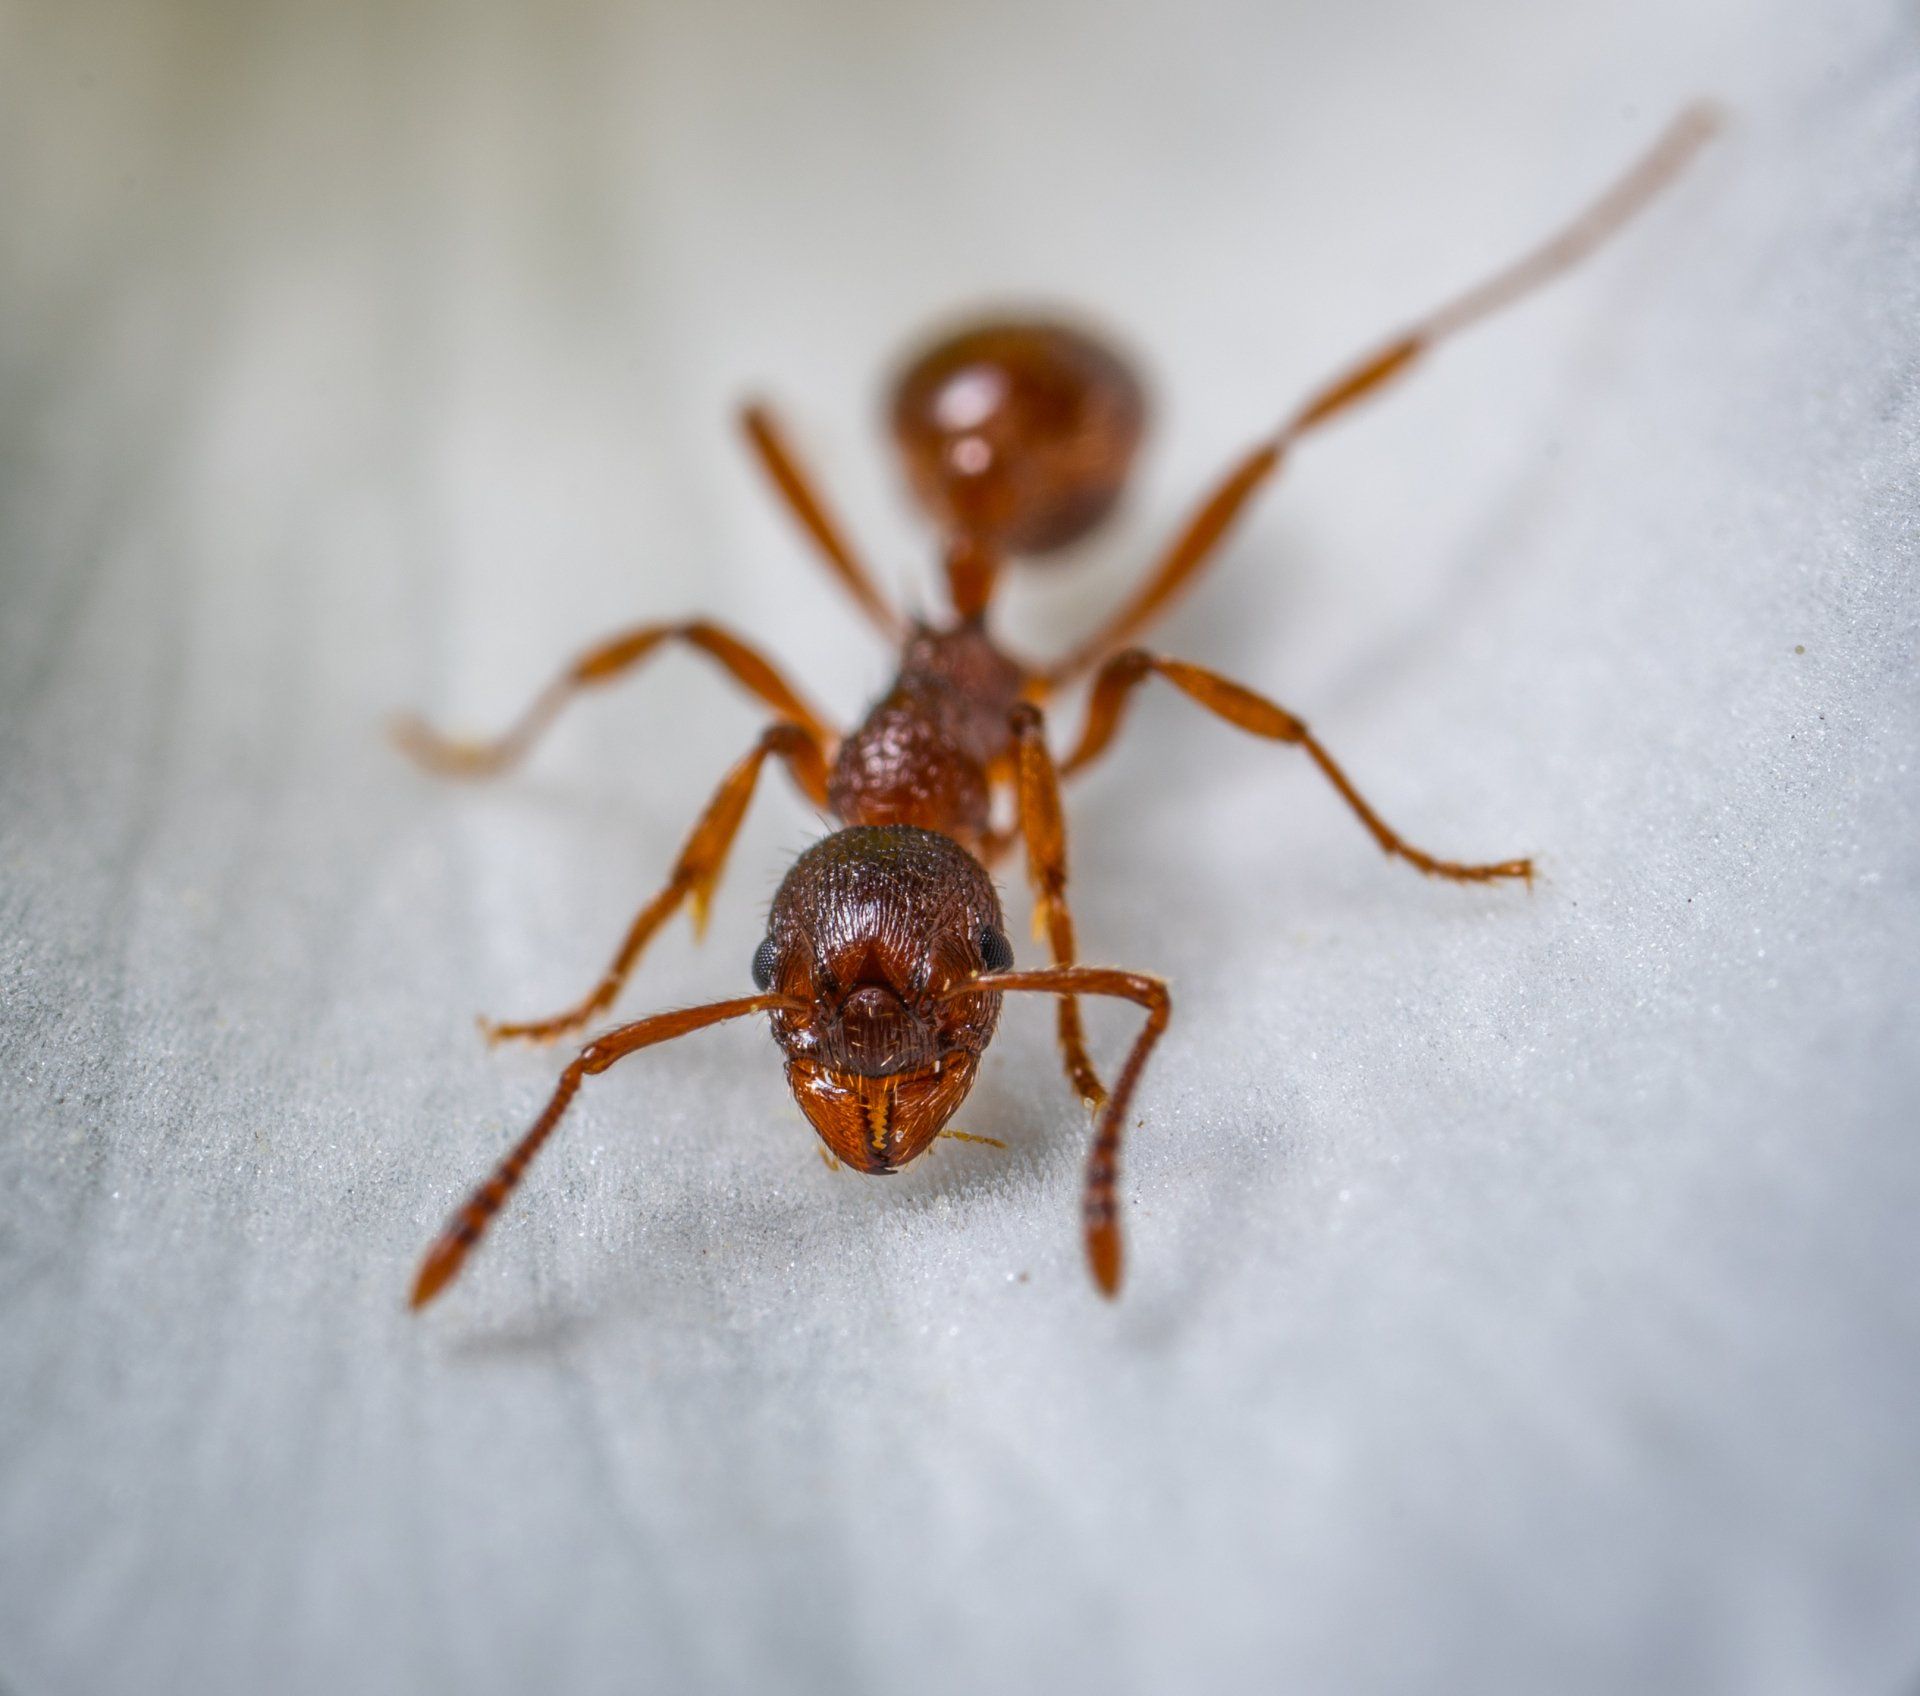 a close up of a red ant on a white surface .